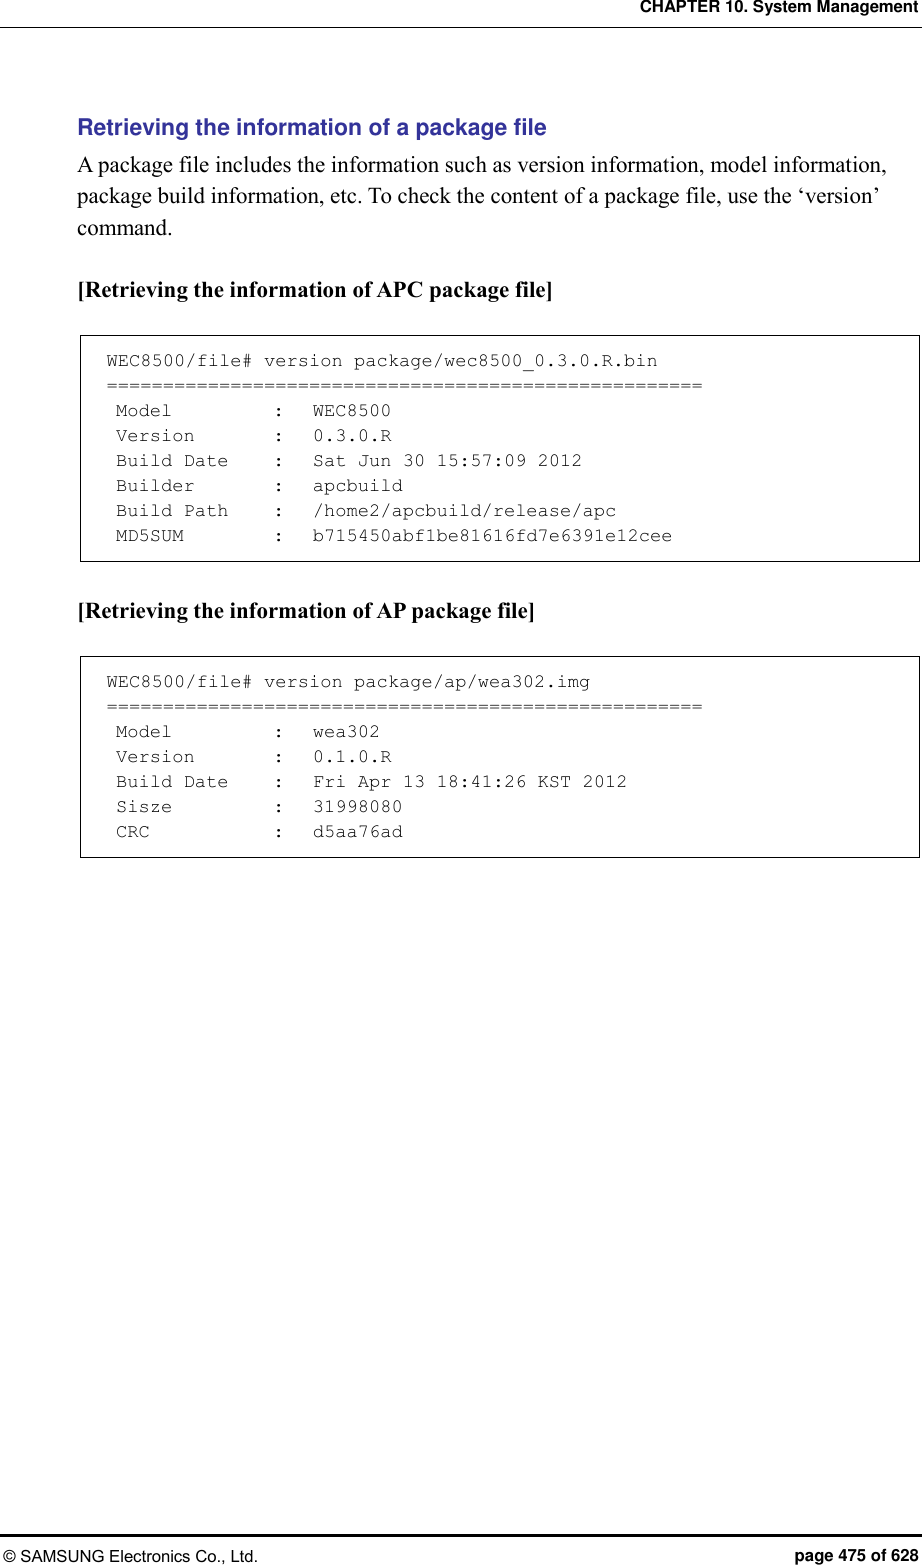 CHAPTER 10. System Management © SAMSUNG Electronics Co., Ltd.  page 475 of 628 Retrieving the information of a package file   A package file includes the information such as version information, model information, package build information, etc. To check the content of a package file, use the ‘version’ command.  [Retrieving the information of APC package file]  WEC8500/file# version package/wec8500_0.3.0.R.bin =====================================================  Model    :   WEC8500  Version    :   0.3.0.R  Build Date    :   Sat Jun 30 15:57:09 2012  Builder    :   apcbuild  Build Path    :   /home2/apcbuild/release/apc  MD5SUM    :   b715450abf1be81616fd7e6391e12cee  [Retrieving the information of AP package file]  WEC8500/file# version package/ap/wea302.img =====================================================  Model    :   wea302  Version    :   0.1.0.R  Build Date    :   Fri Apr 13 18:41:26 KST 2012  Sisze    :   31998080  CRC    :   d5aa76ad  